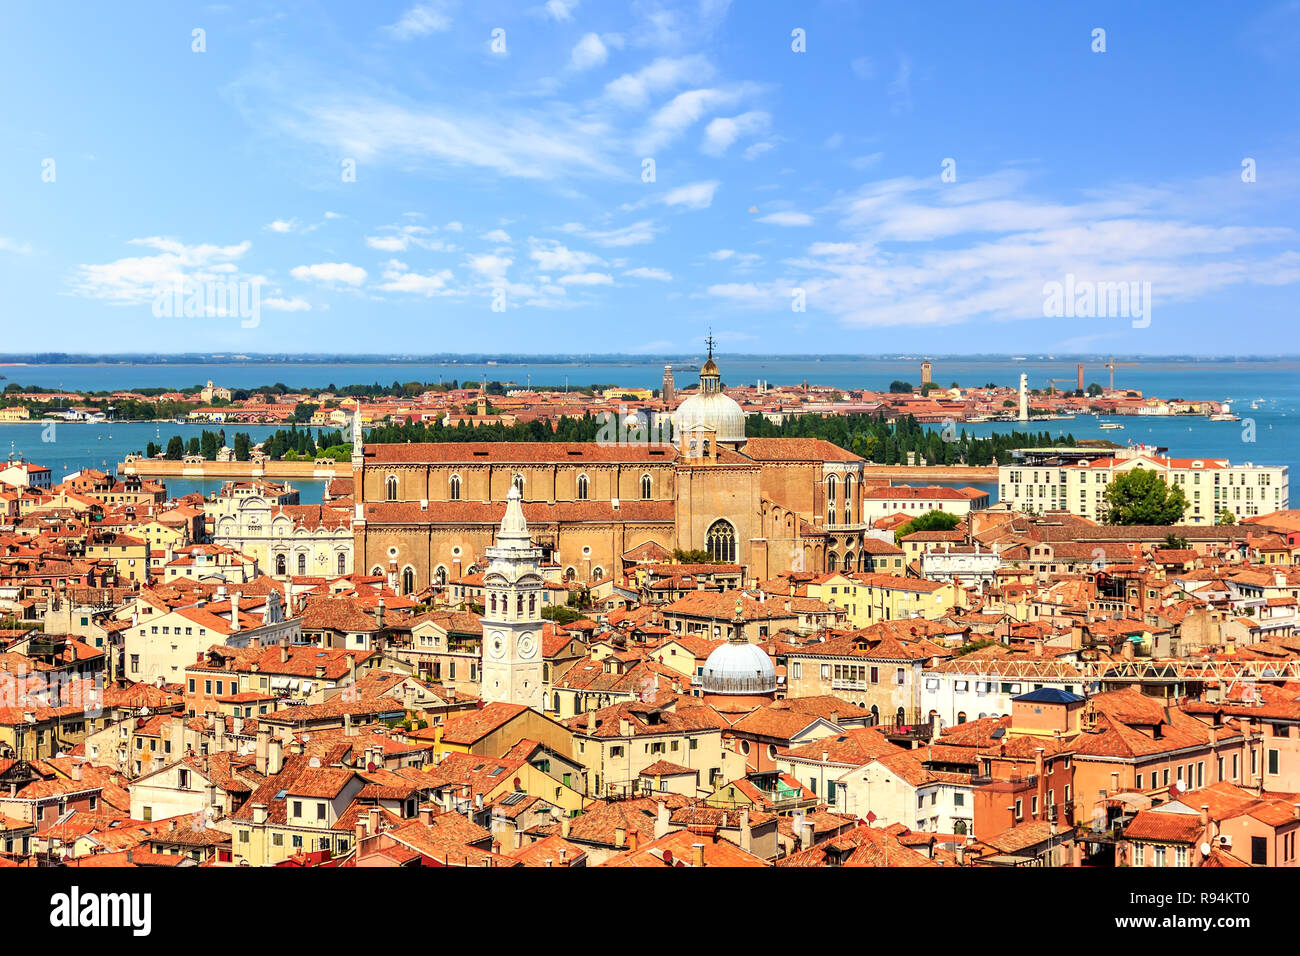 Basilicas and roofs of Venice, view from the San Marco Campanile Stock Photo